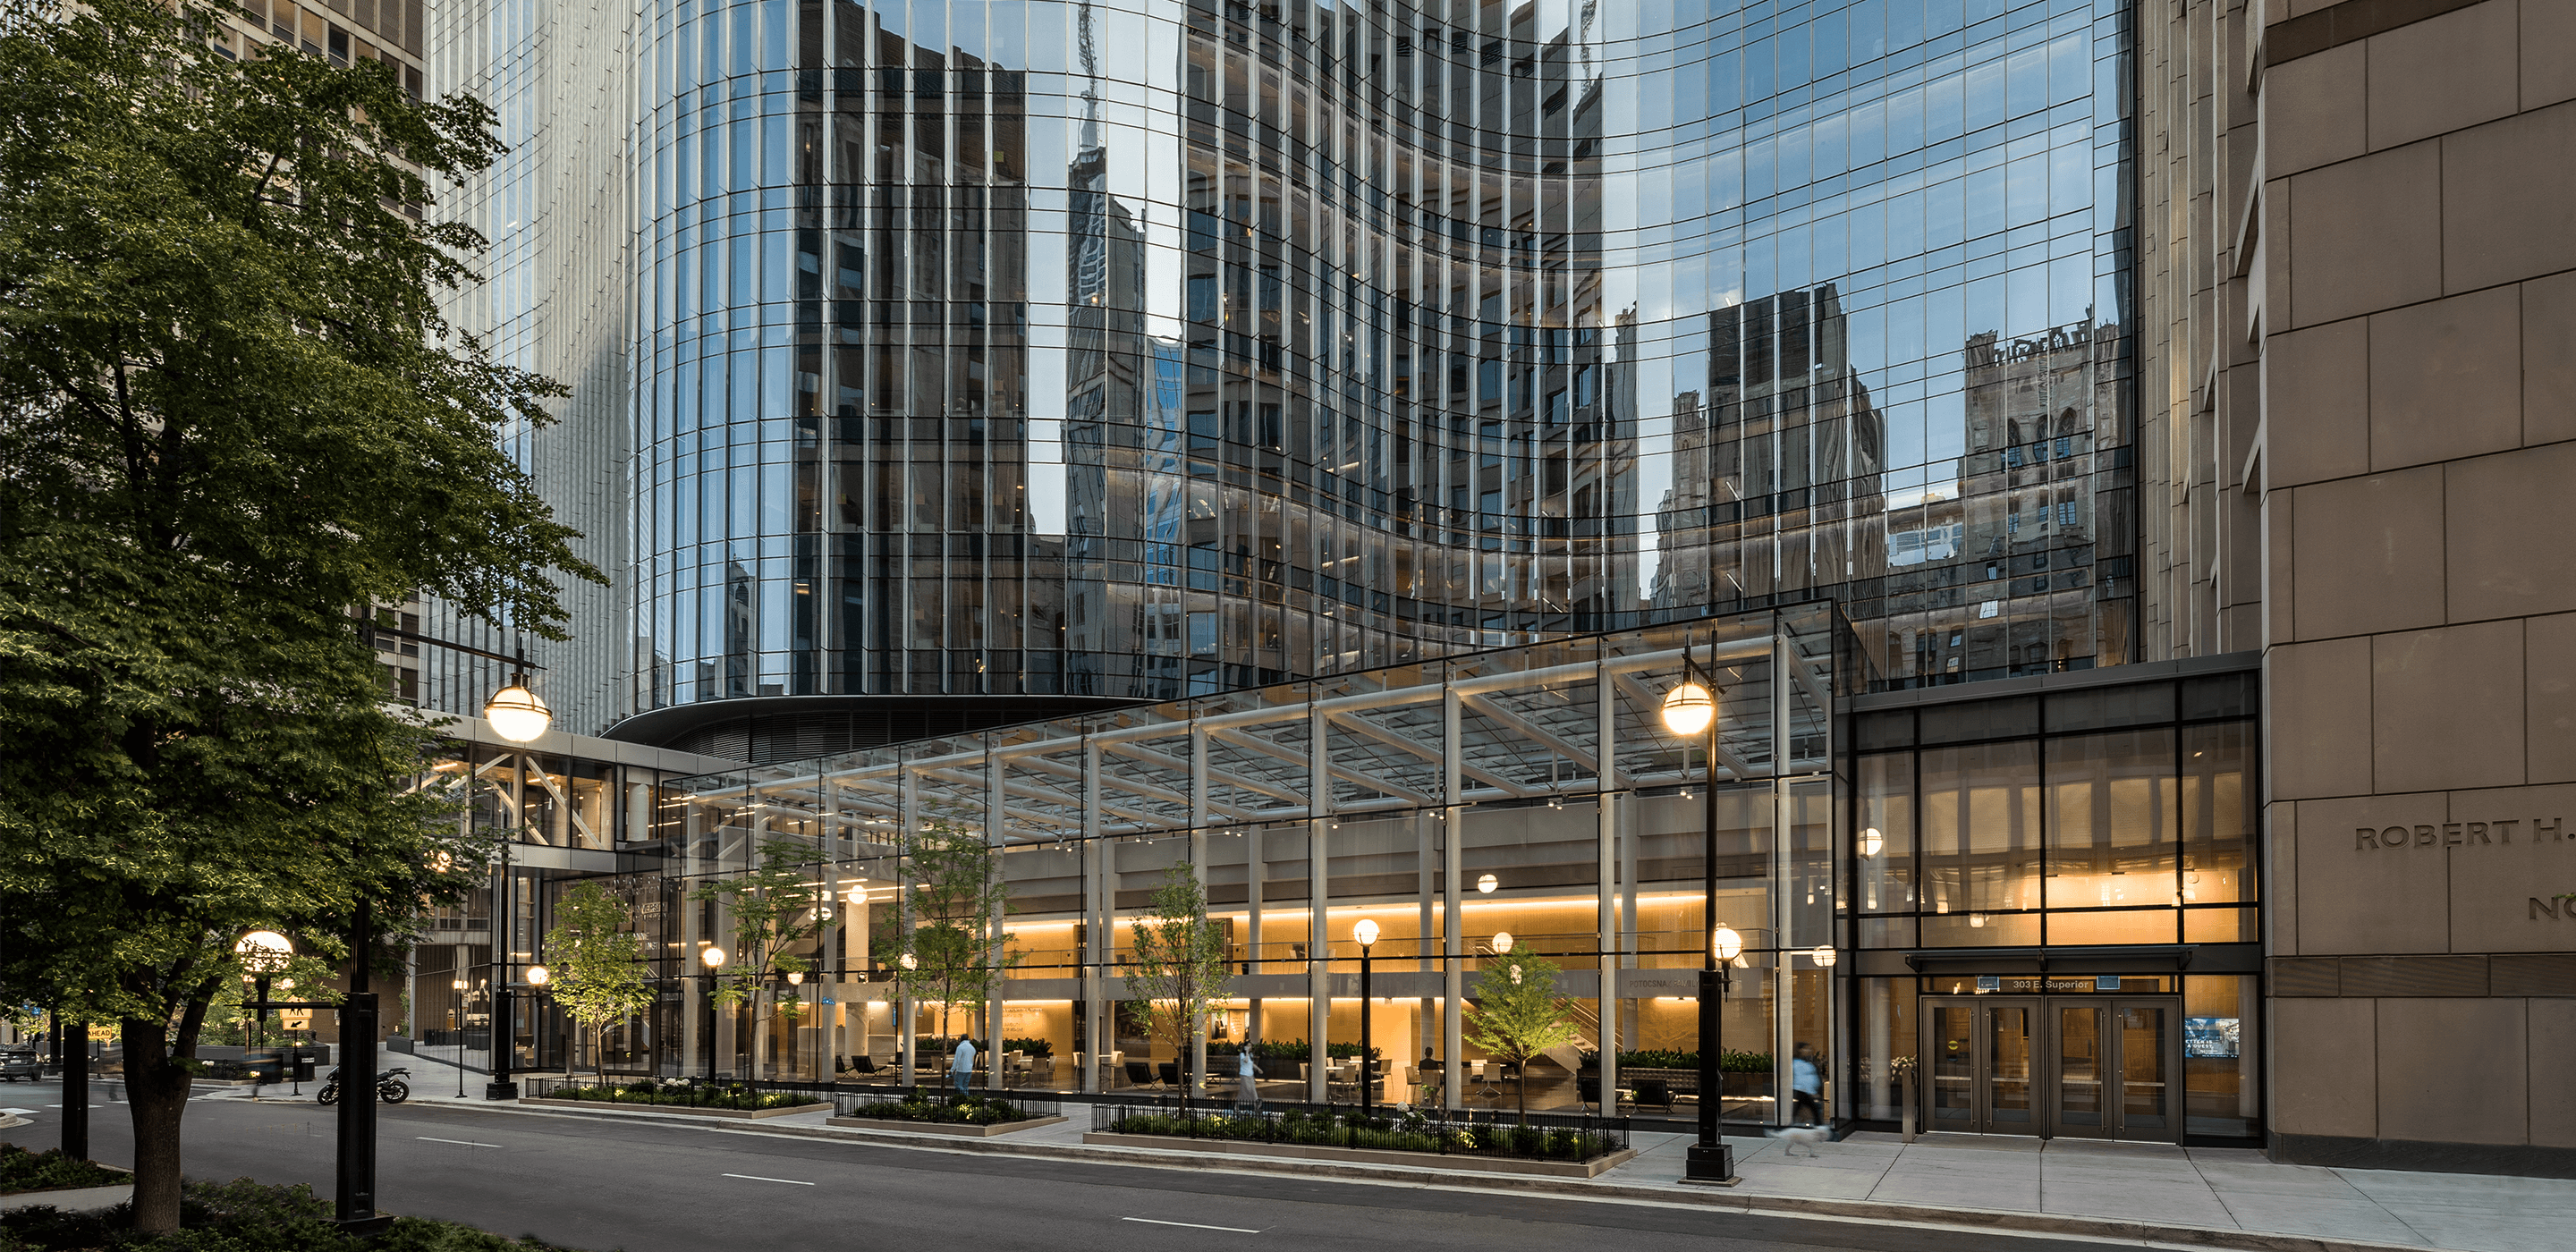 Photo of urban research lab in downtown Chicago. A ground-floor atrium is topped by a glass tower with an undulating façade.